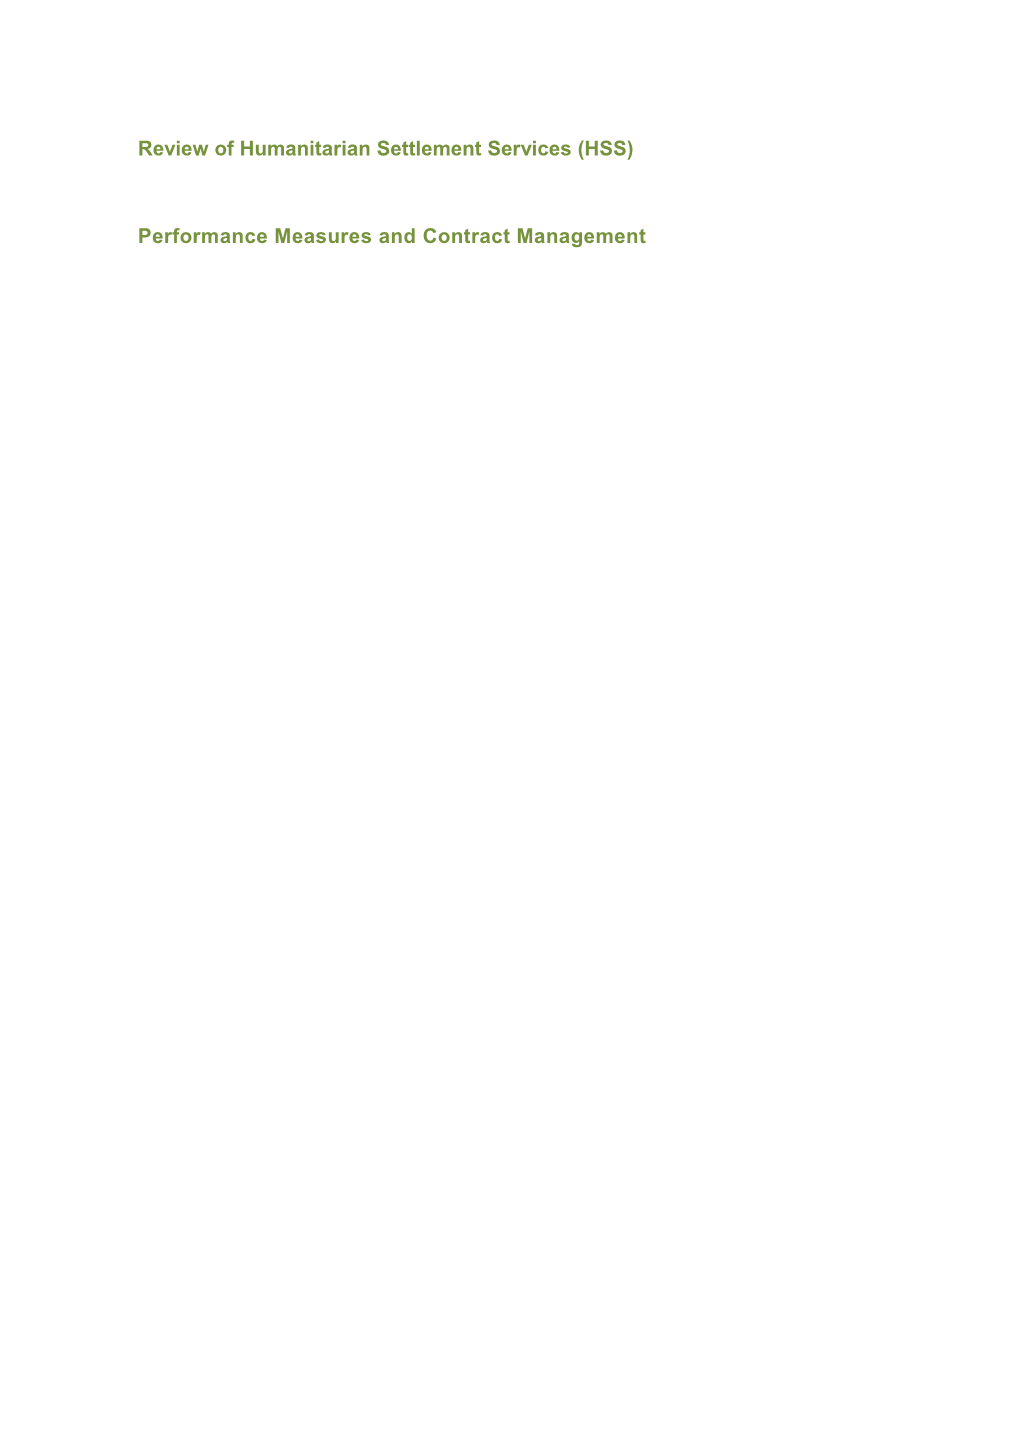 Review of Humanitarian Settlement Services (HSS) : Performance Measures and Contract Management